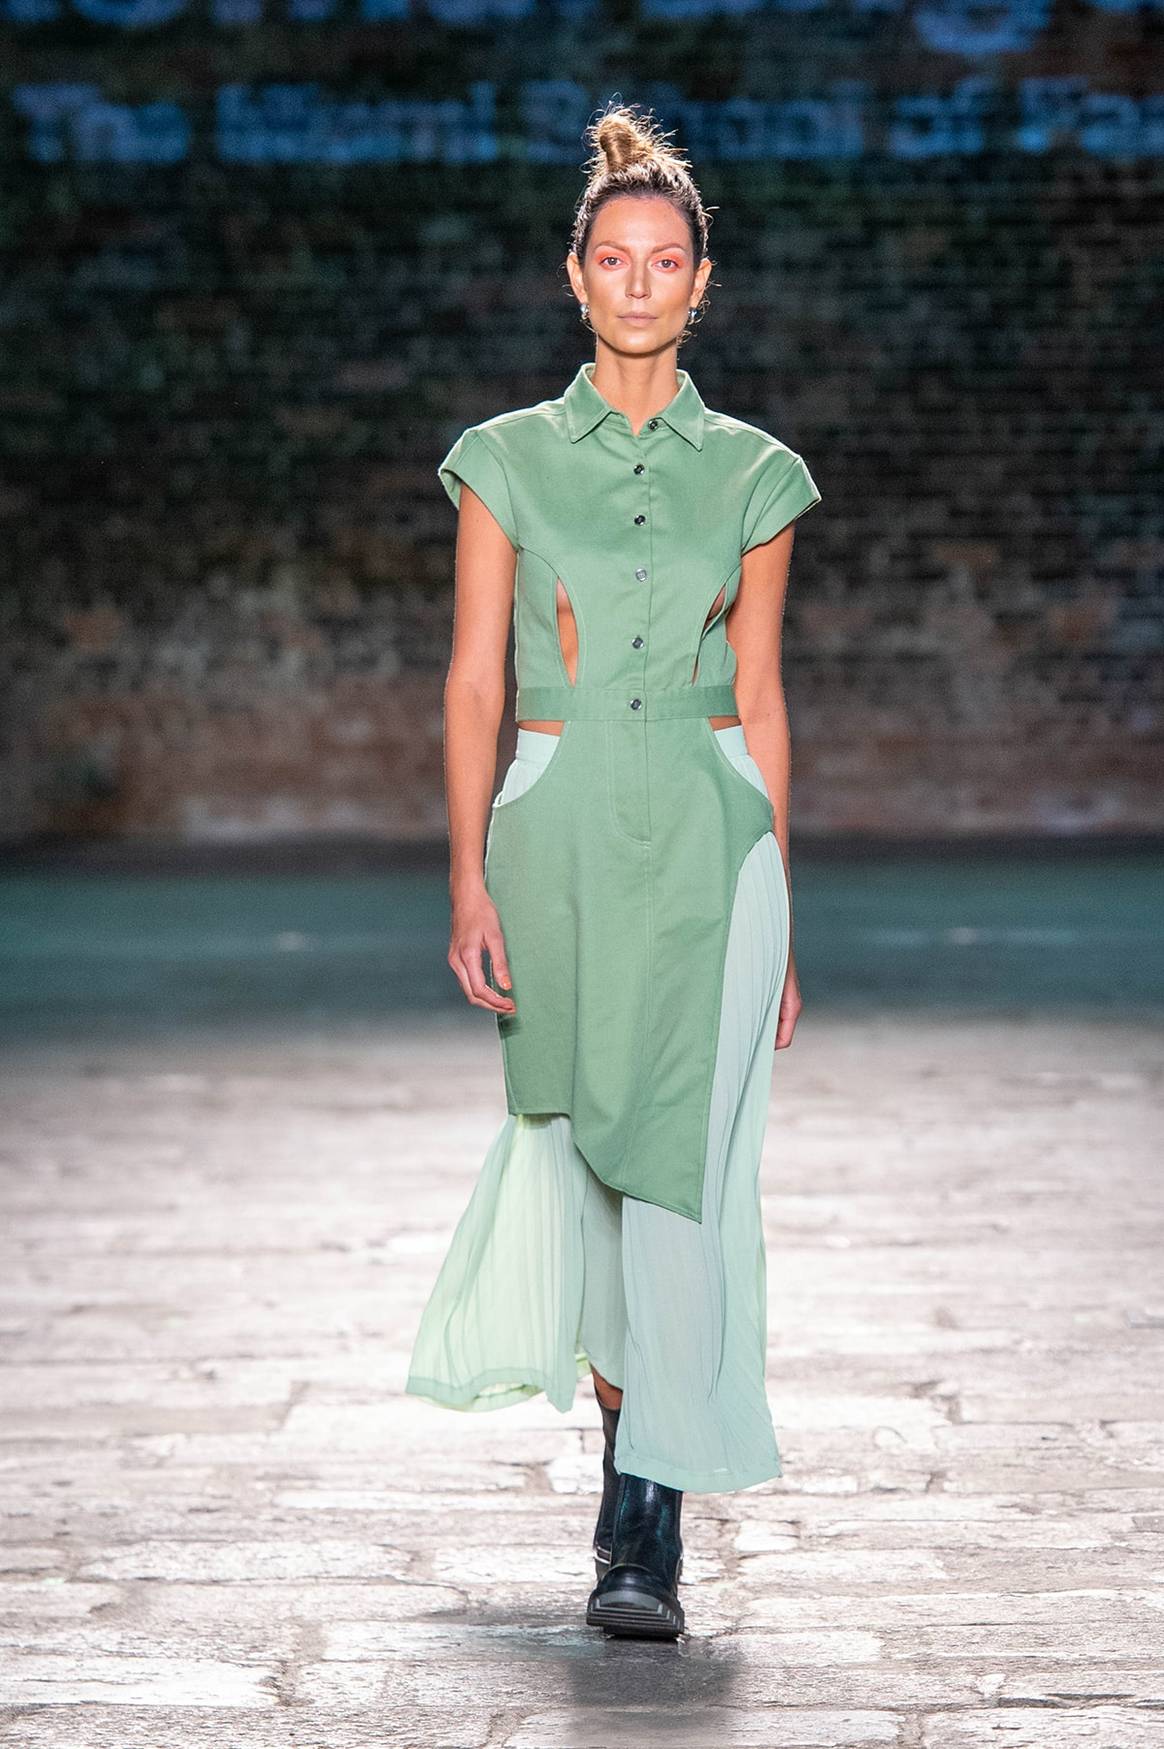 In pictures: Istituto Marangoni Miami students make debut at Costa Rica Fashion Week